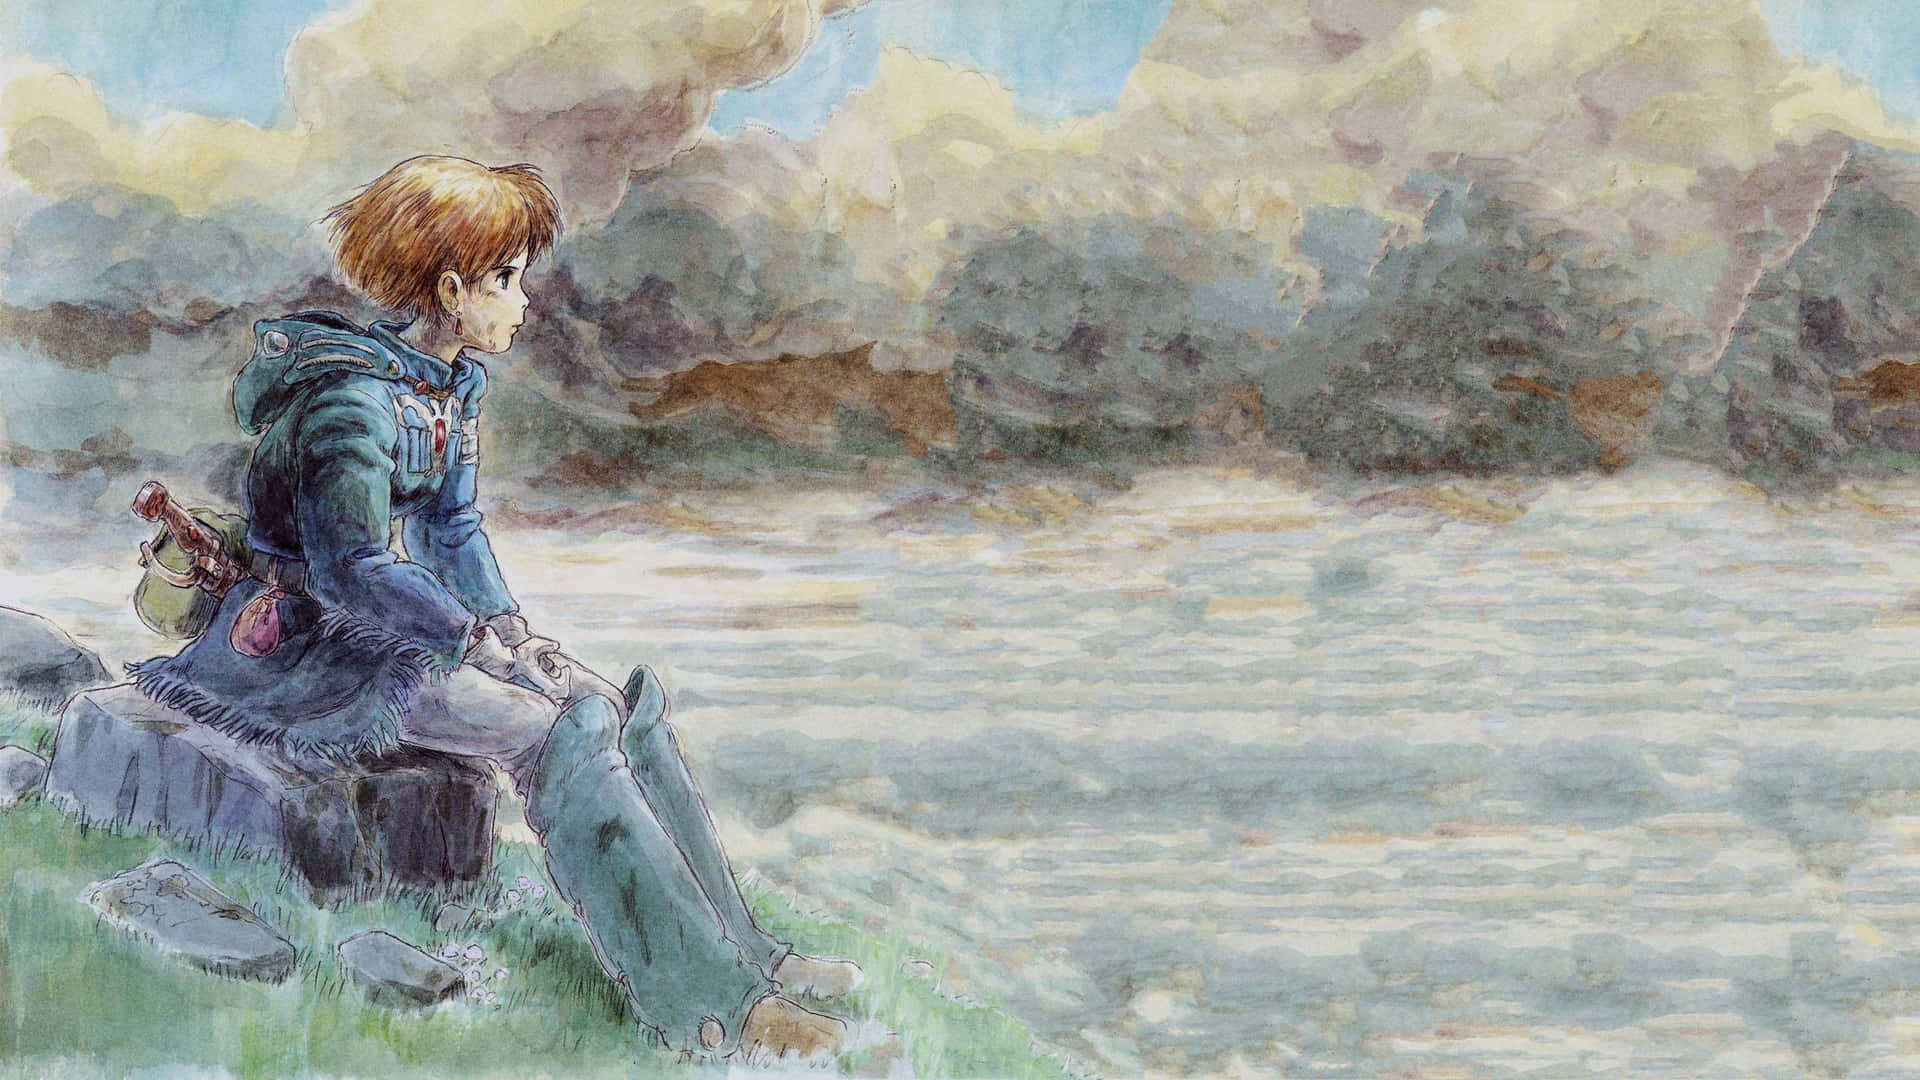 Nausicaä Riding Her Glider in the Valley of the Wind Wallpaper